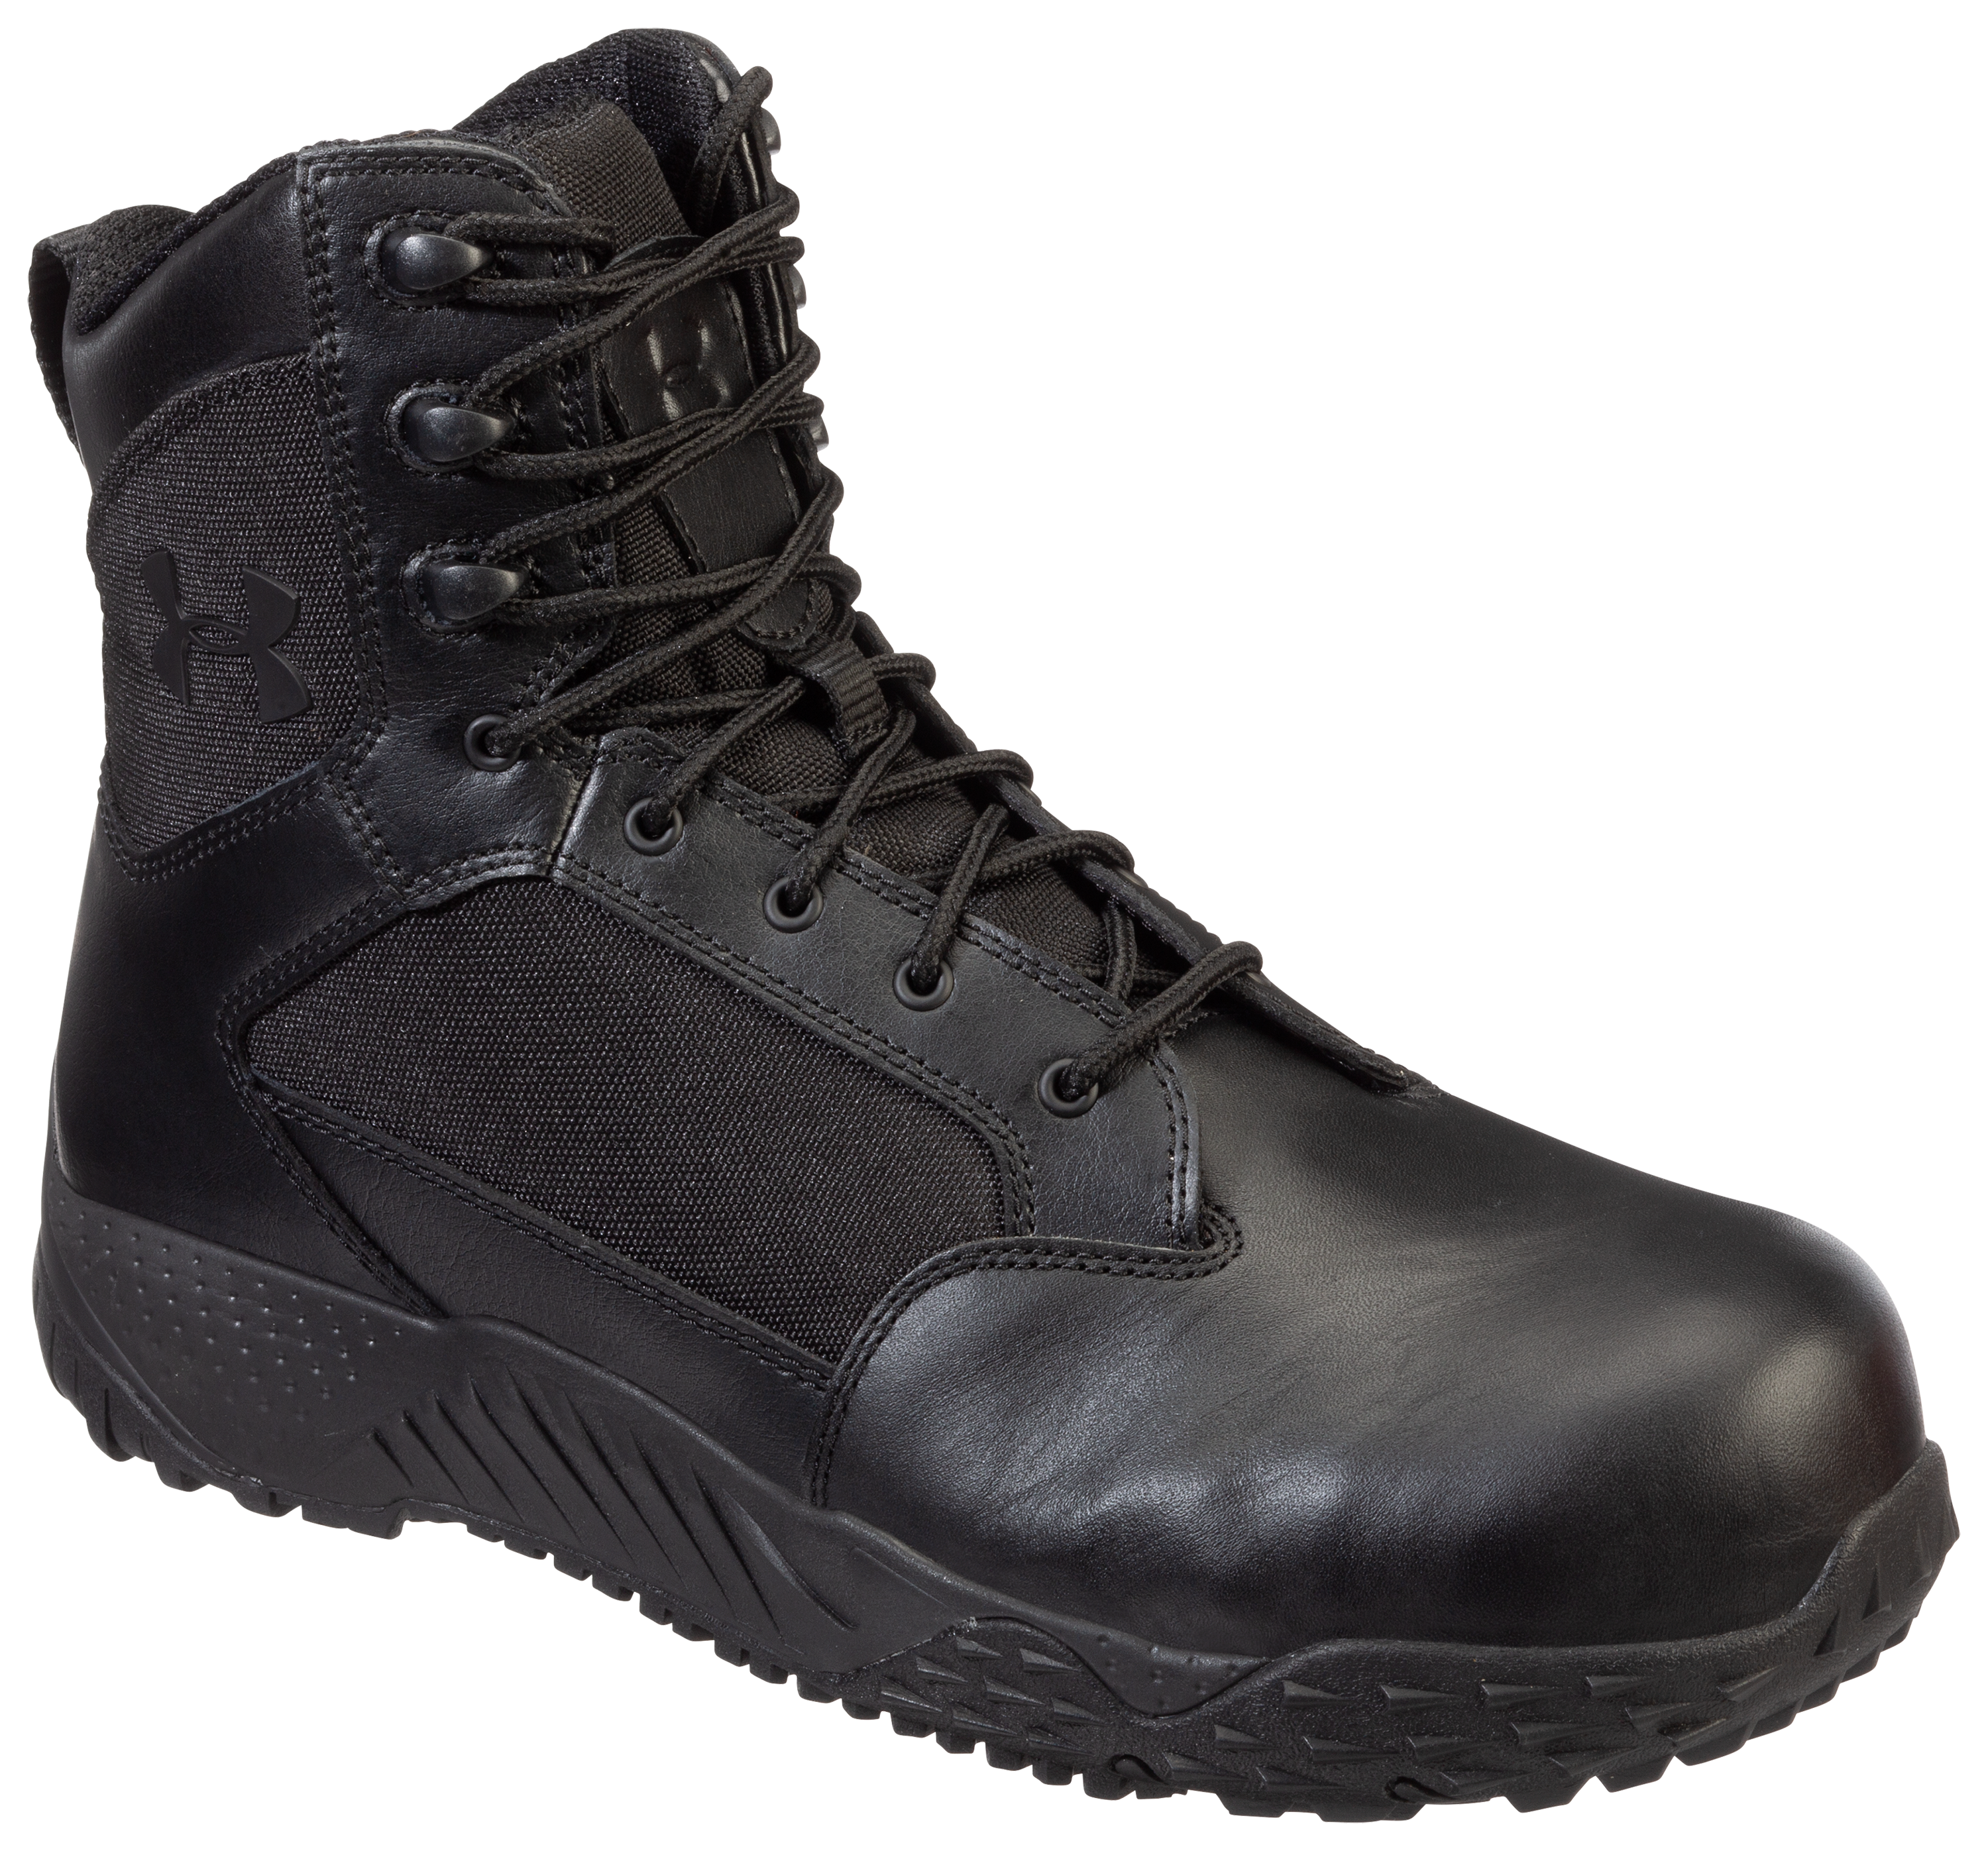 Under Armour Stellar Protect Composite Toe Tactical Duty Boots for Men